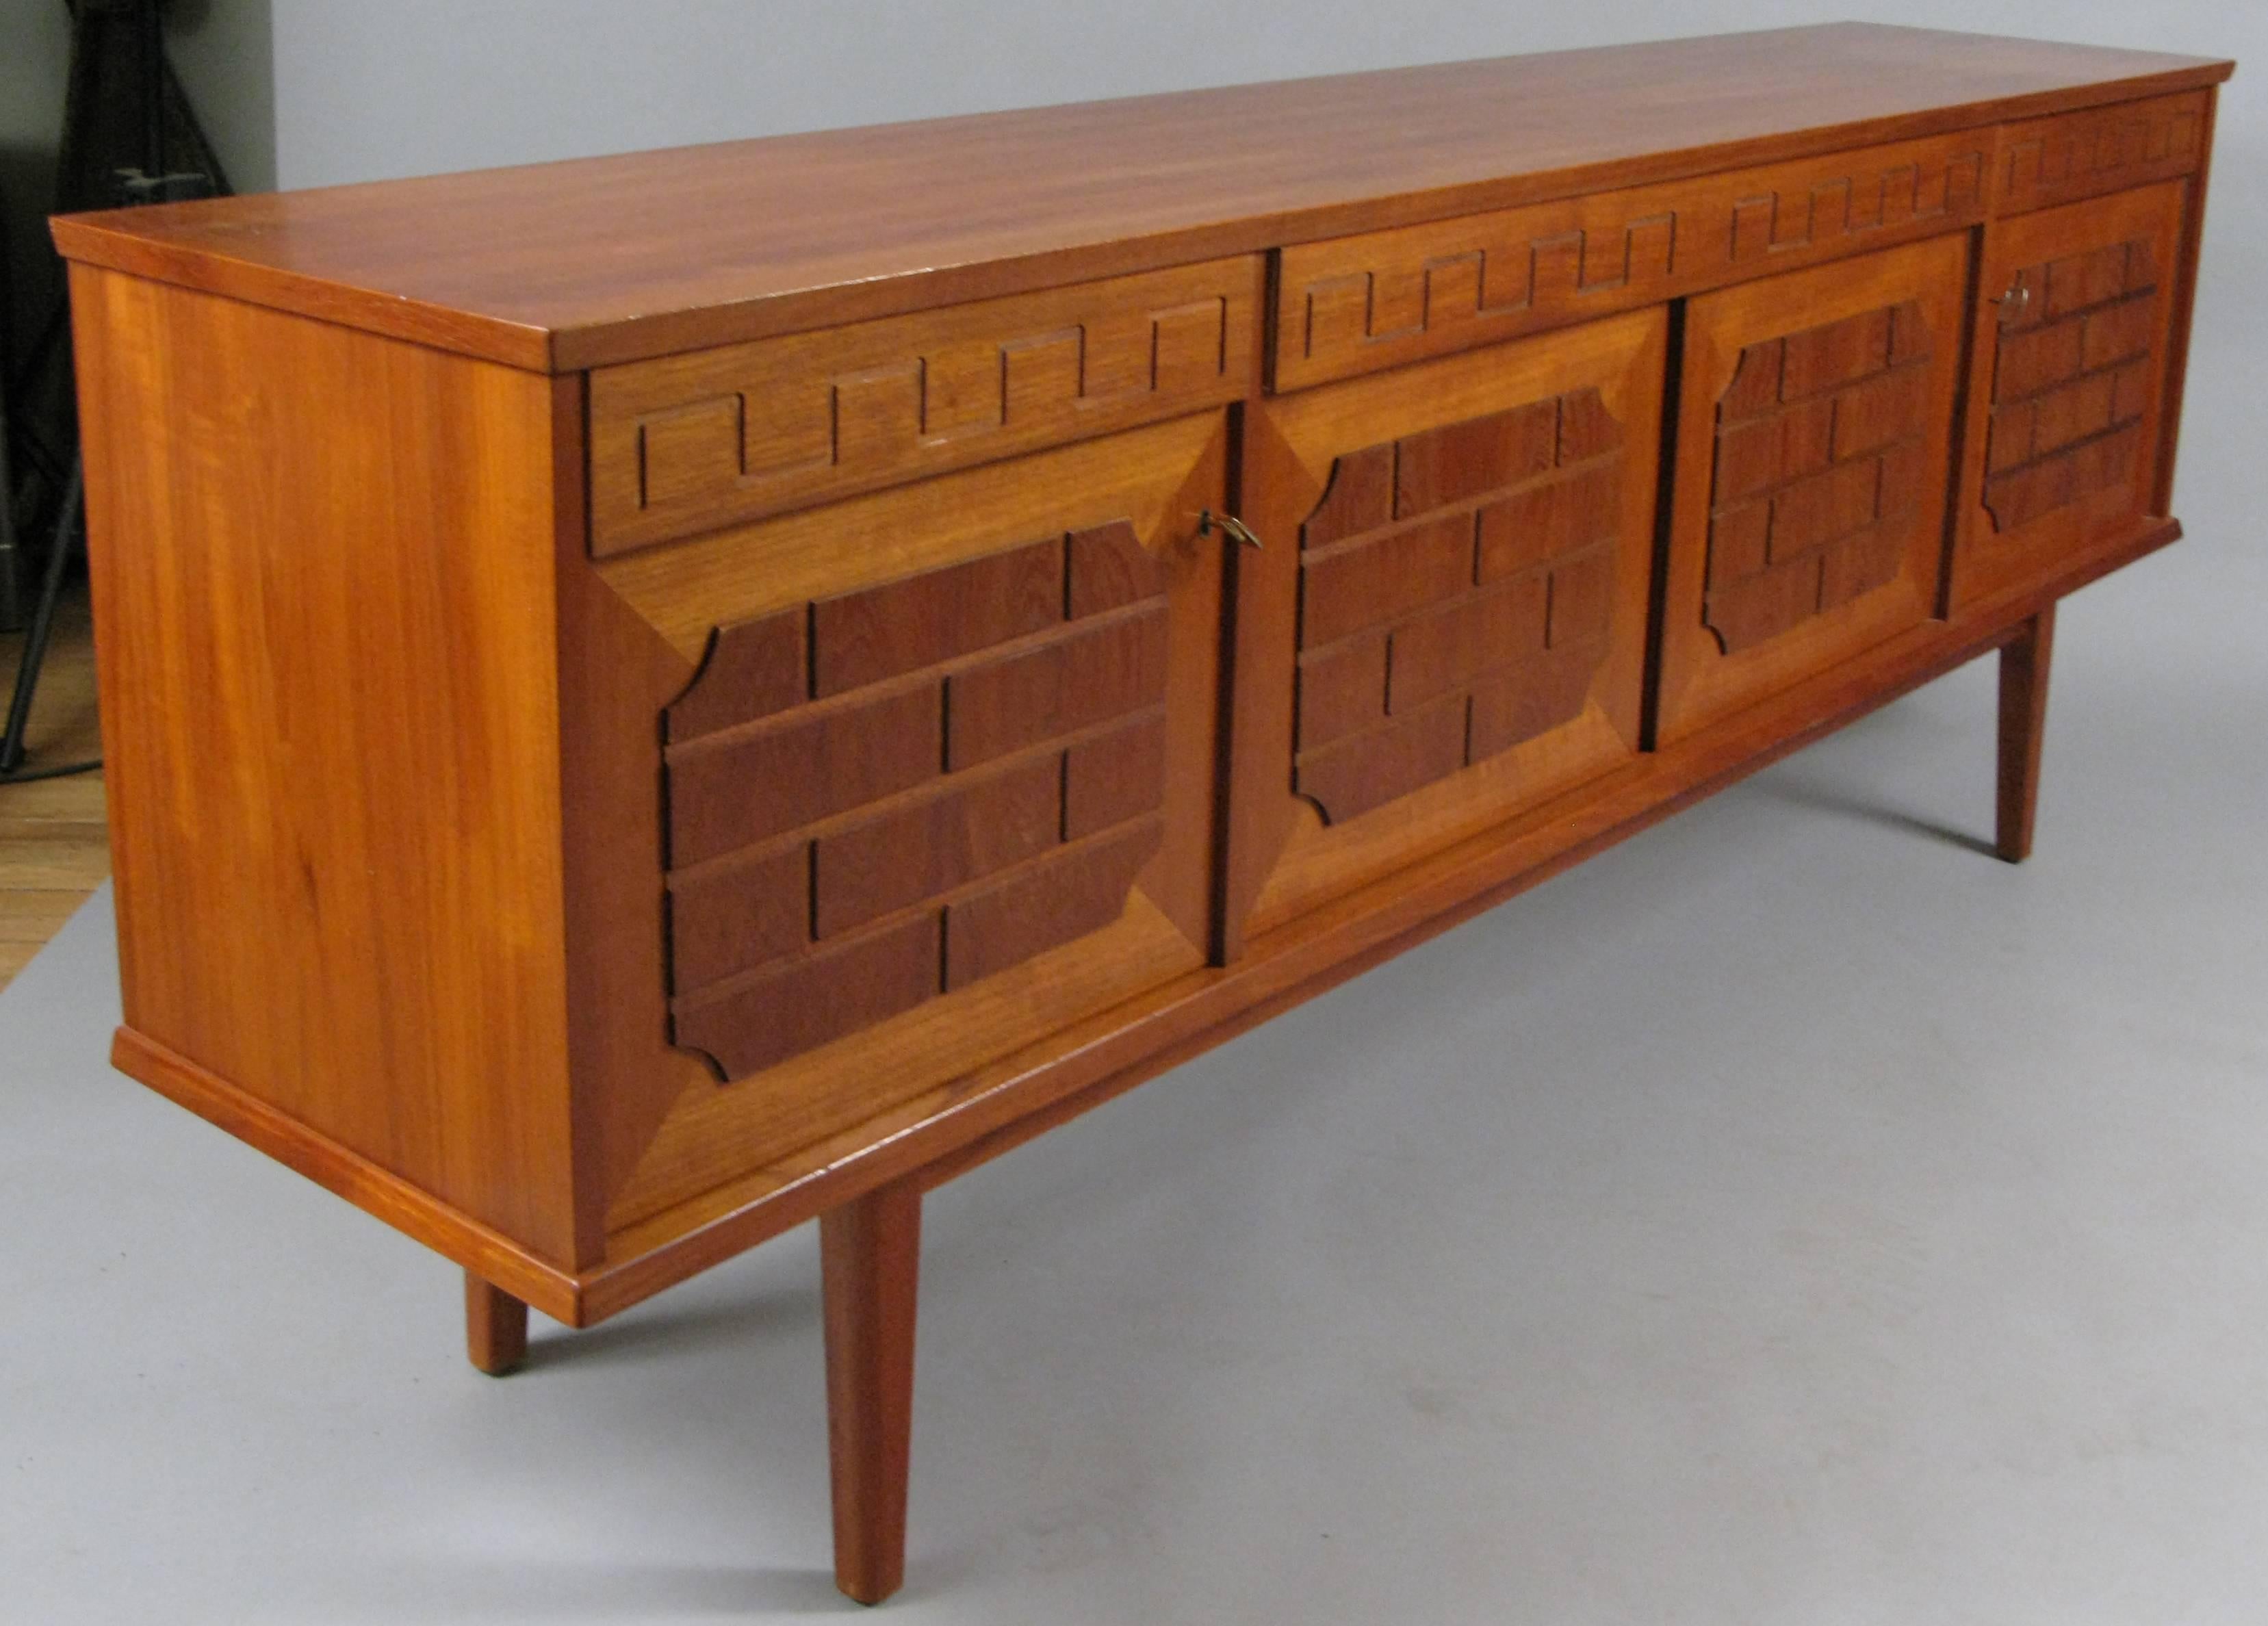 A beautiful 1960s Danish teak credenza sideboard cabinet, with very nice Greek key details on the drawer fronts, and a raised brick detail in walnut on the doors. Fitted interior with shelves and drawers. With original keys.